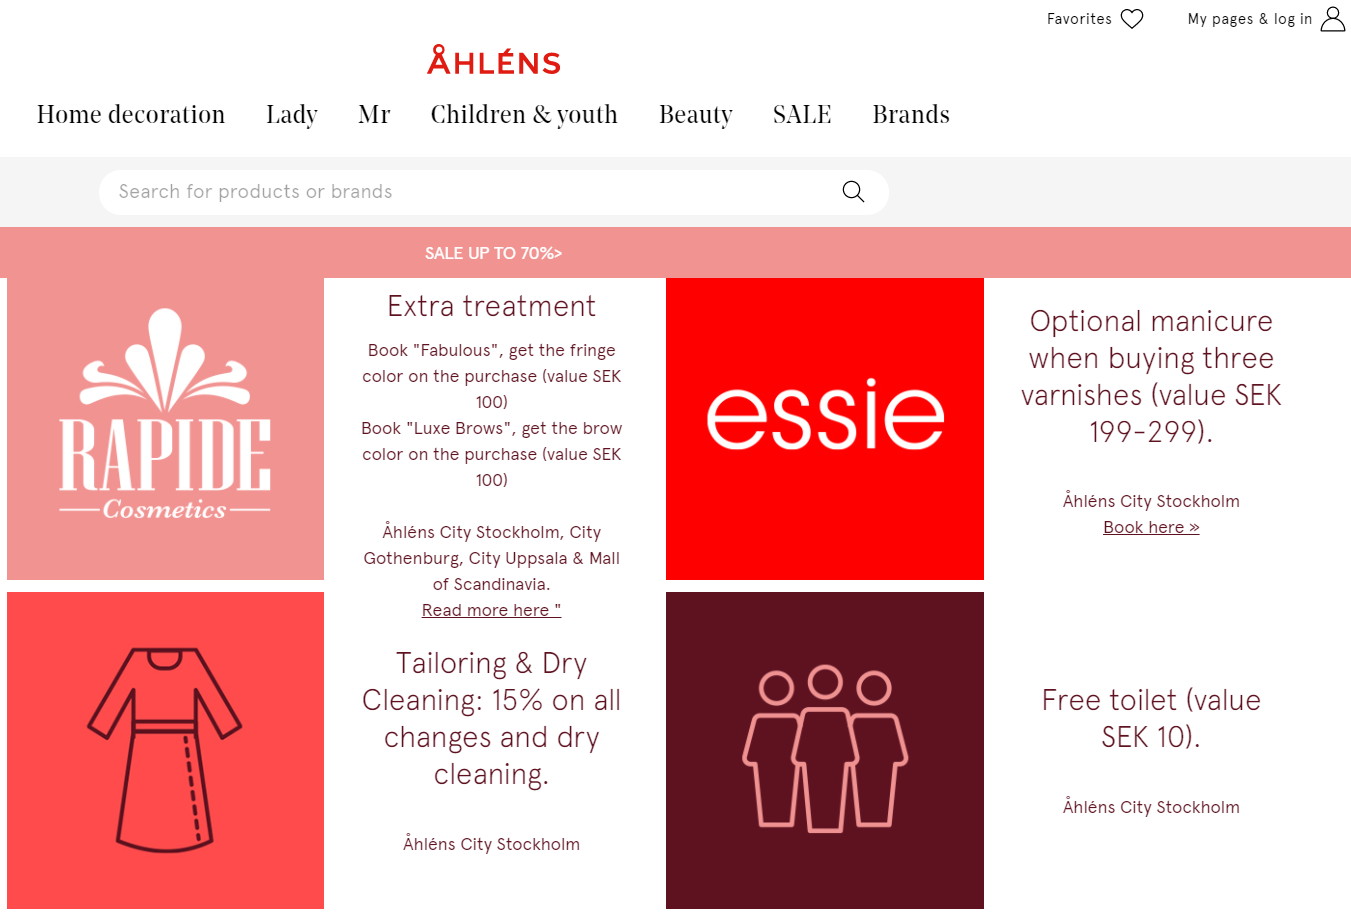 The loyalty program page for Ahlens